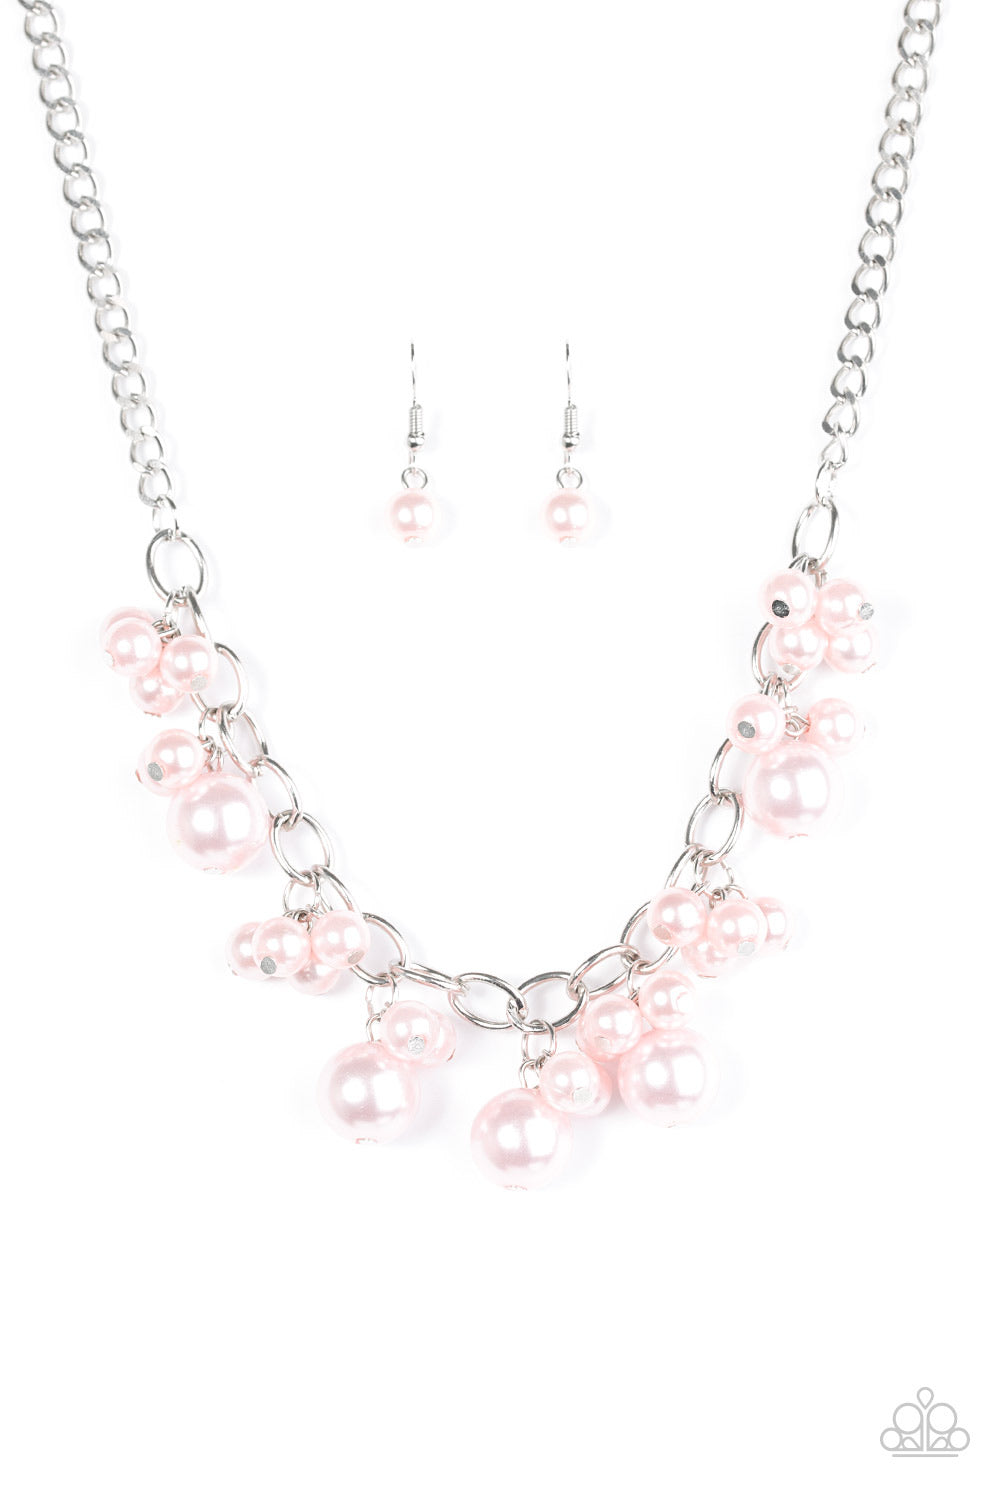 Paparazzi Accessories - Celebrity Treatment - Pink Necklace - TheMasterCollection